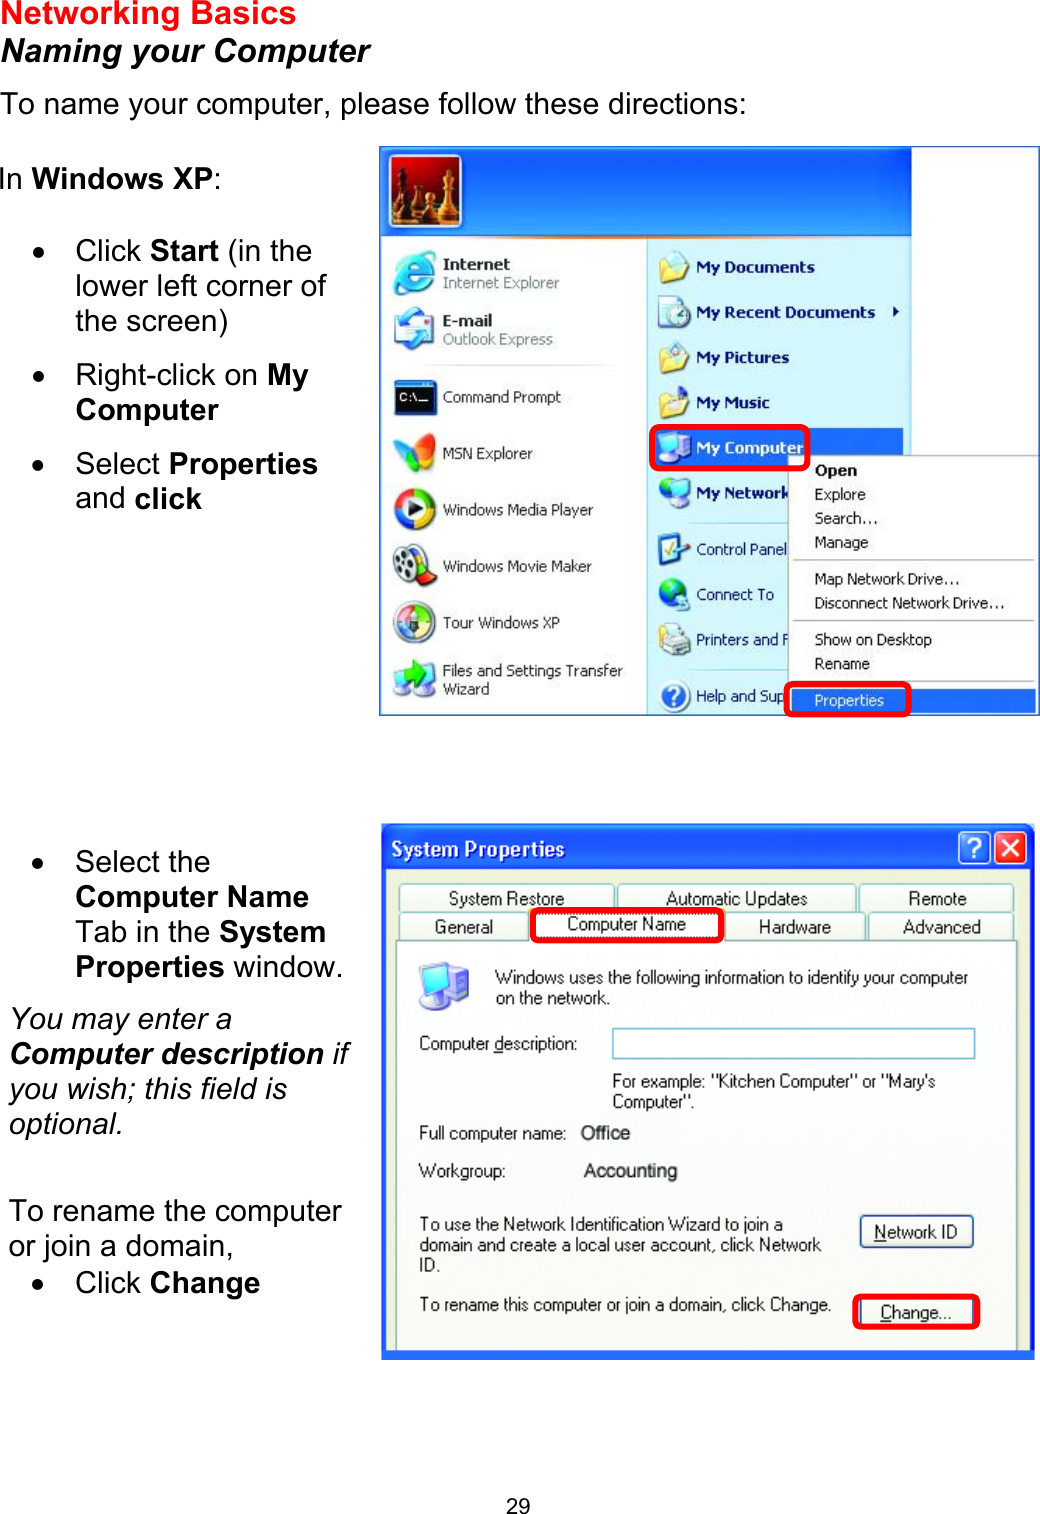  29Networking Basics  Naming your Computer To name your computer, please follow these directions:           In Windows XP:  •  Click Start (in the lower left corner of the screen) •  Right-click on My Computer •  Select Properties and click  •  Select the Computer Name Tab in the System Properties window. You may enter a Computer description if you wish; this field is optional.  To rename the computer or join a domain, •  Click Change  